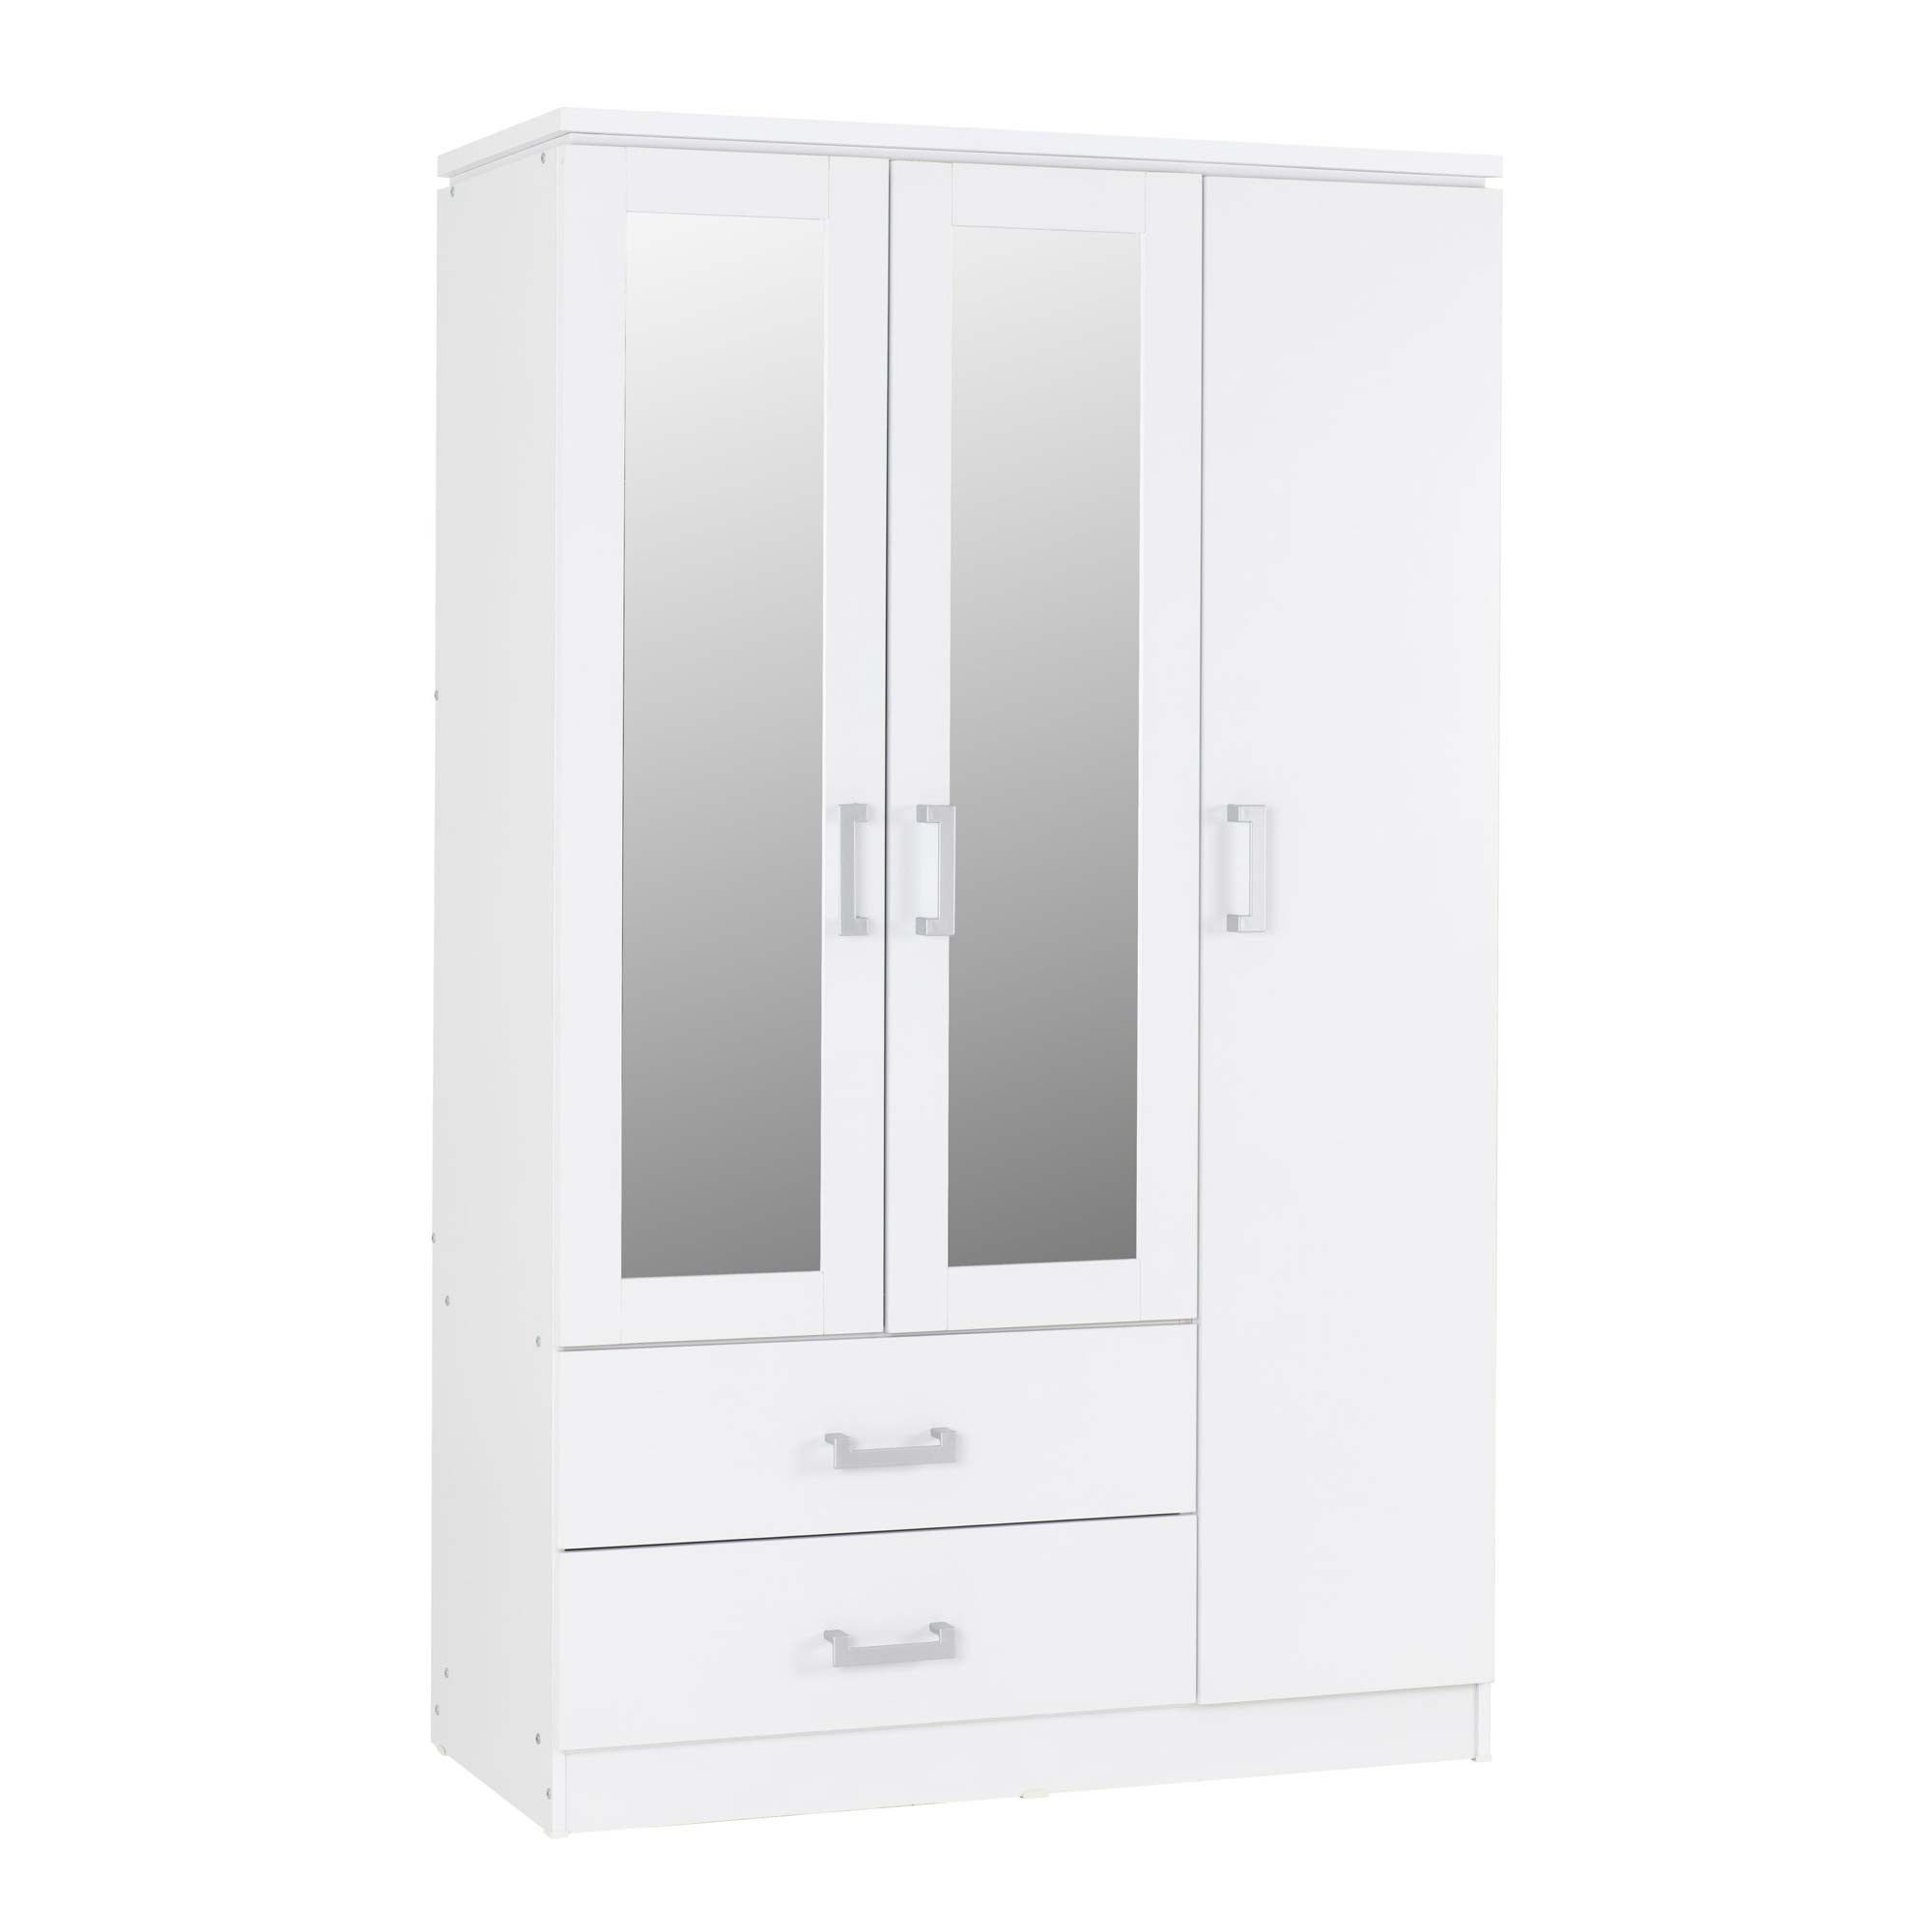 Charles White 3 Door 2 Drawer Wardrobe | Wardrobes | Bedroom Storage Intended For White 3 Door Wardrobes With Drawers (View 12 of 15)